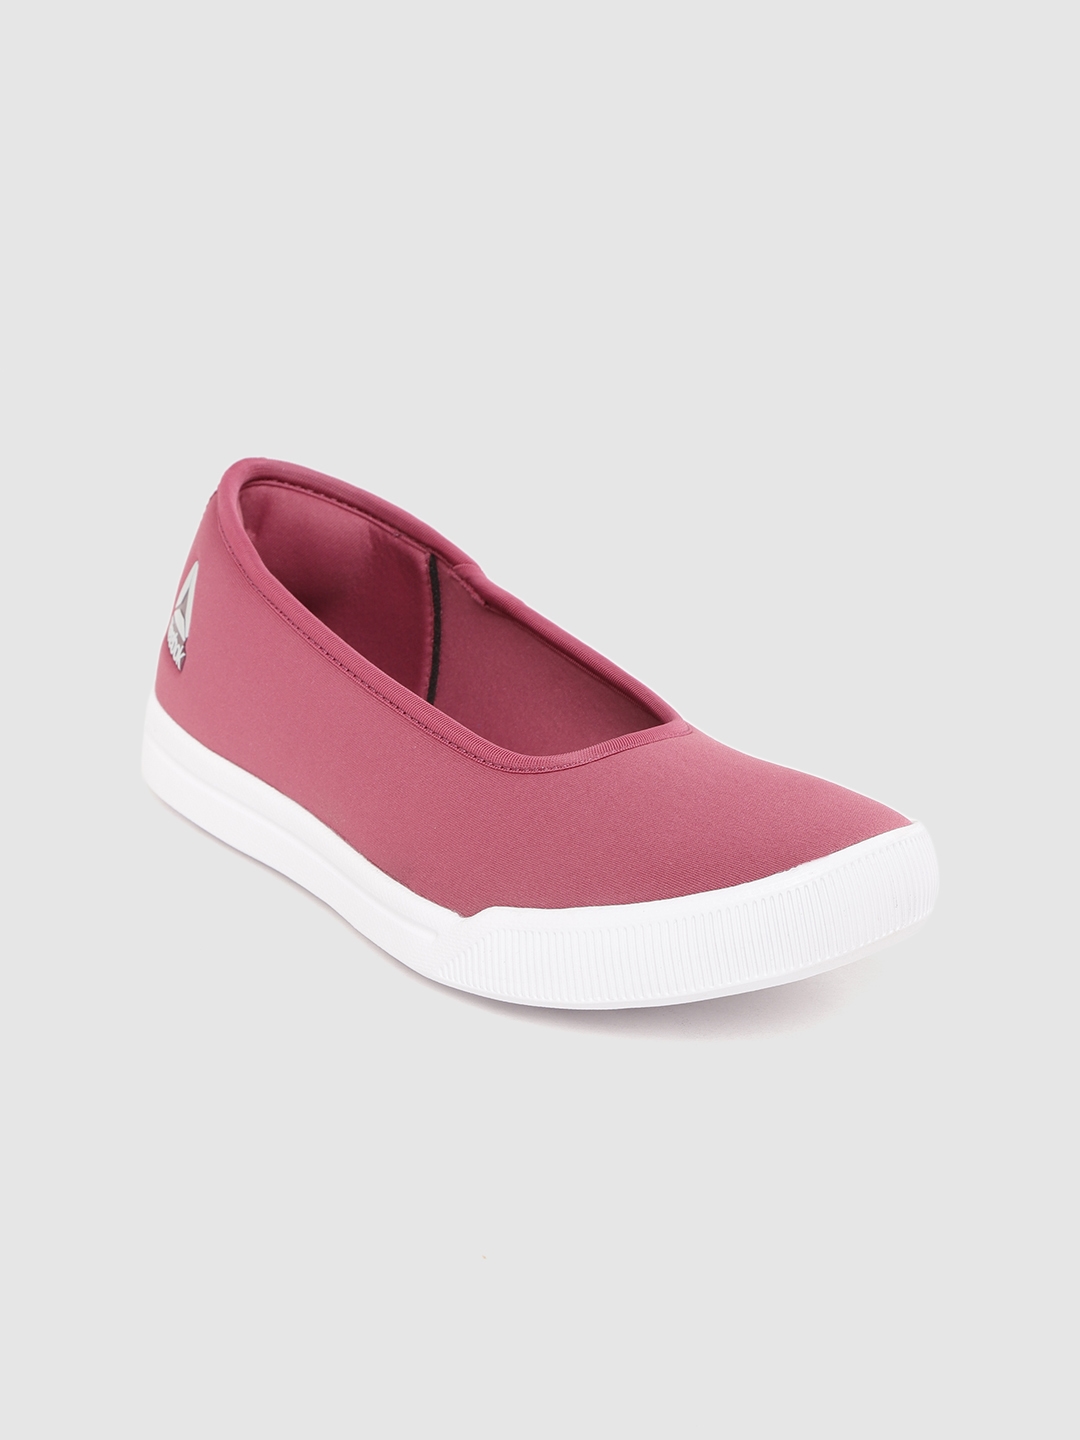 Buy Ballerina Shoe For Women At Best Prices Online In India | Tata CLiQ